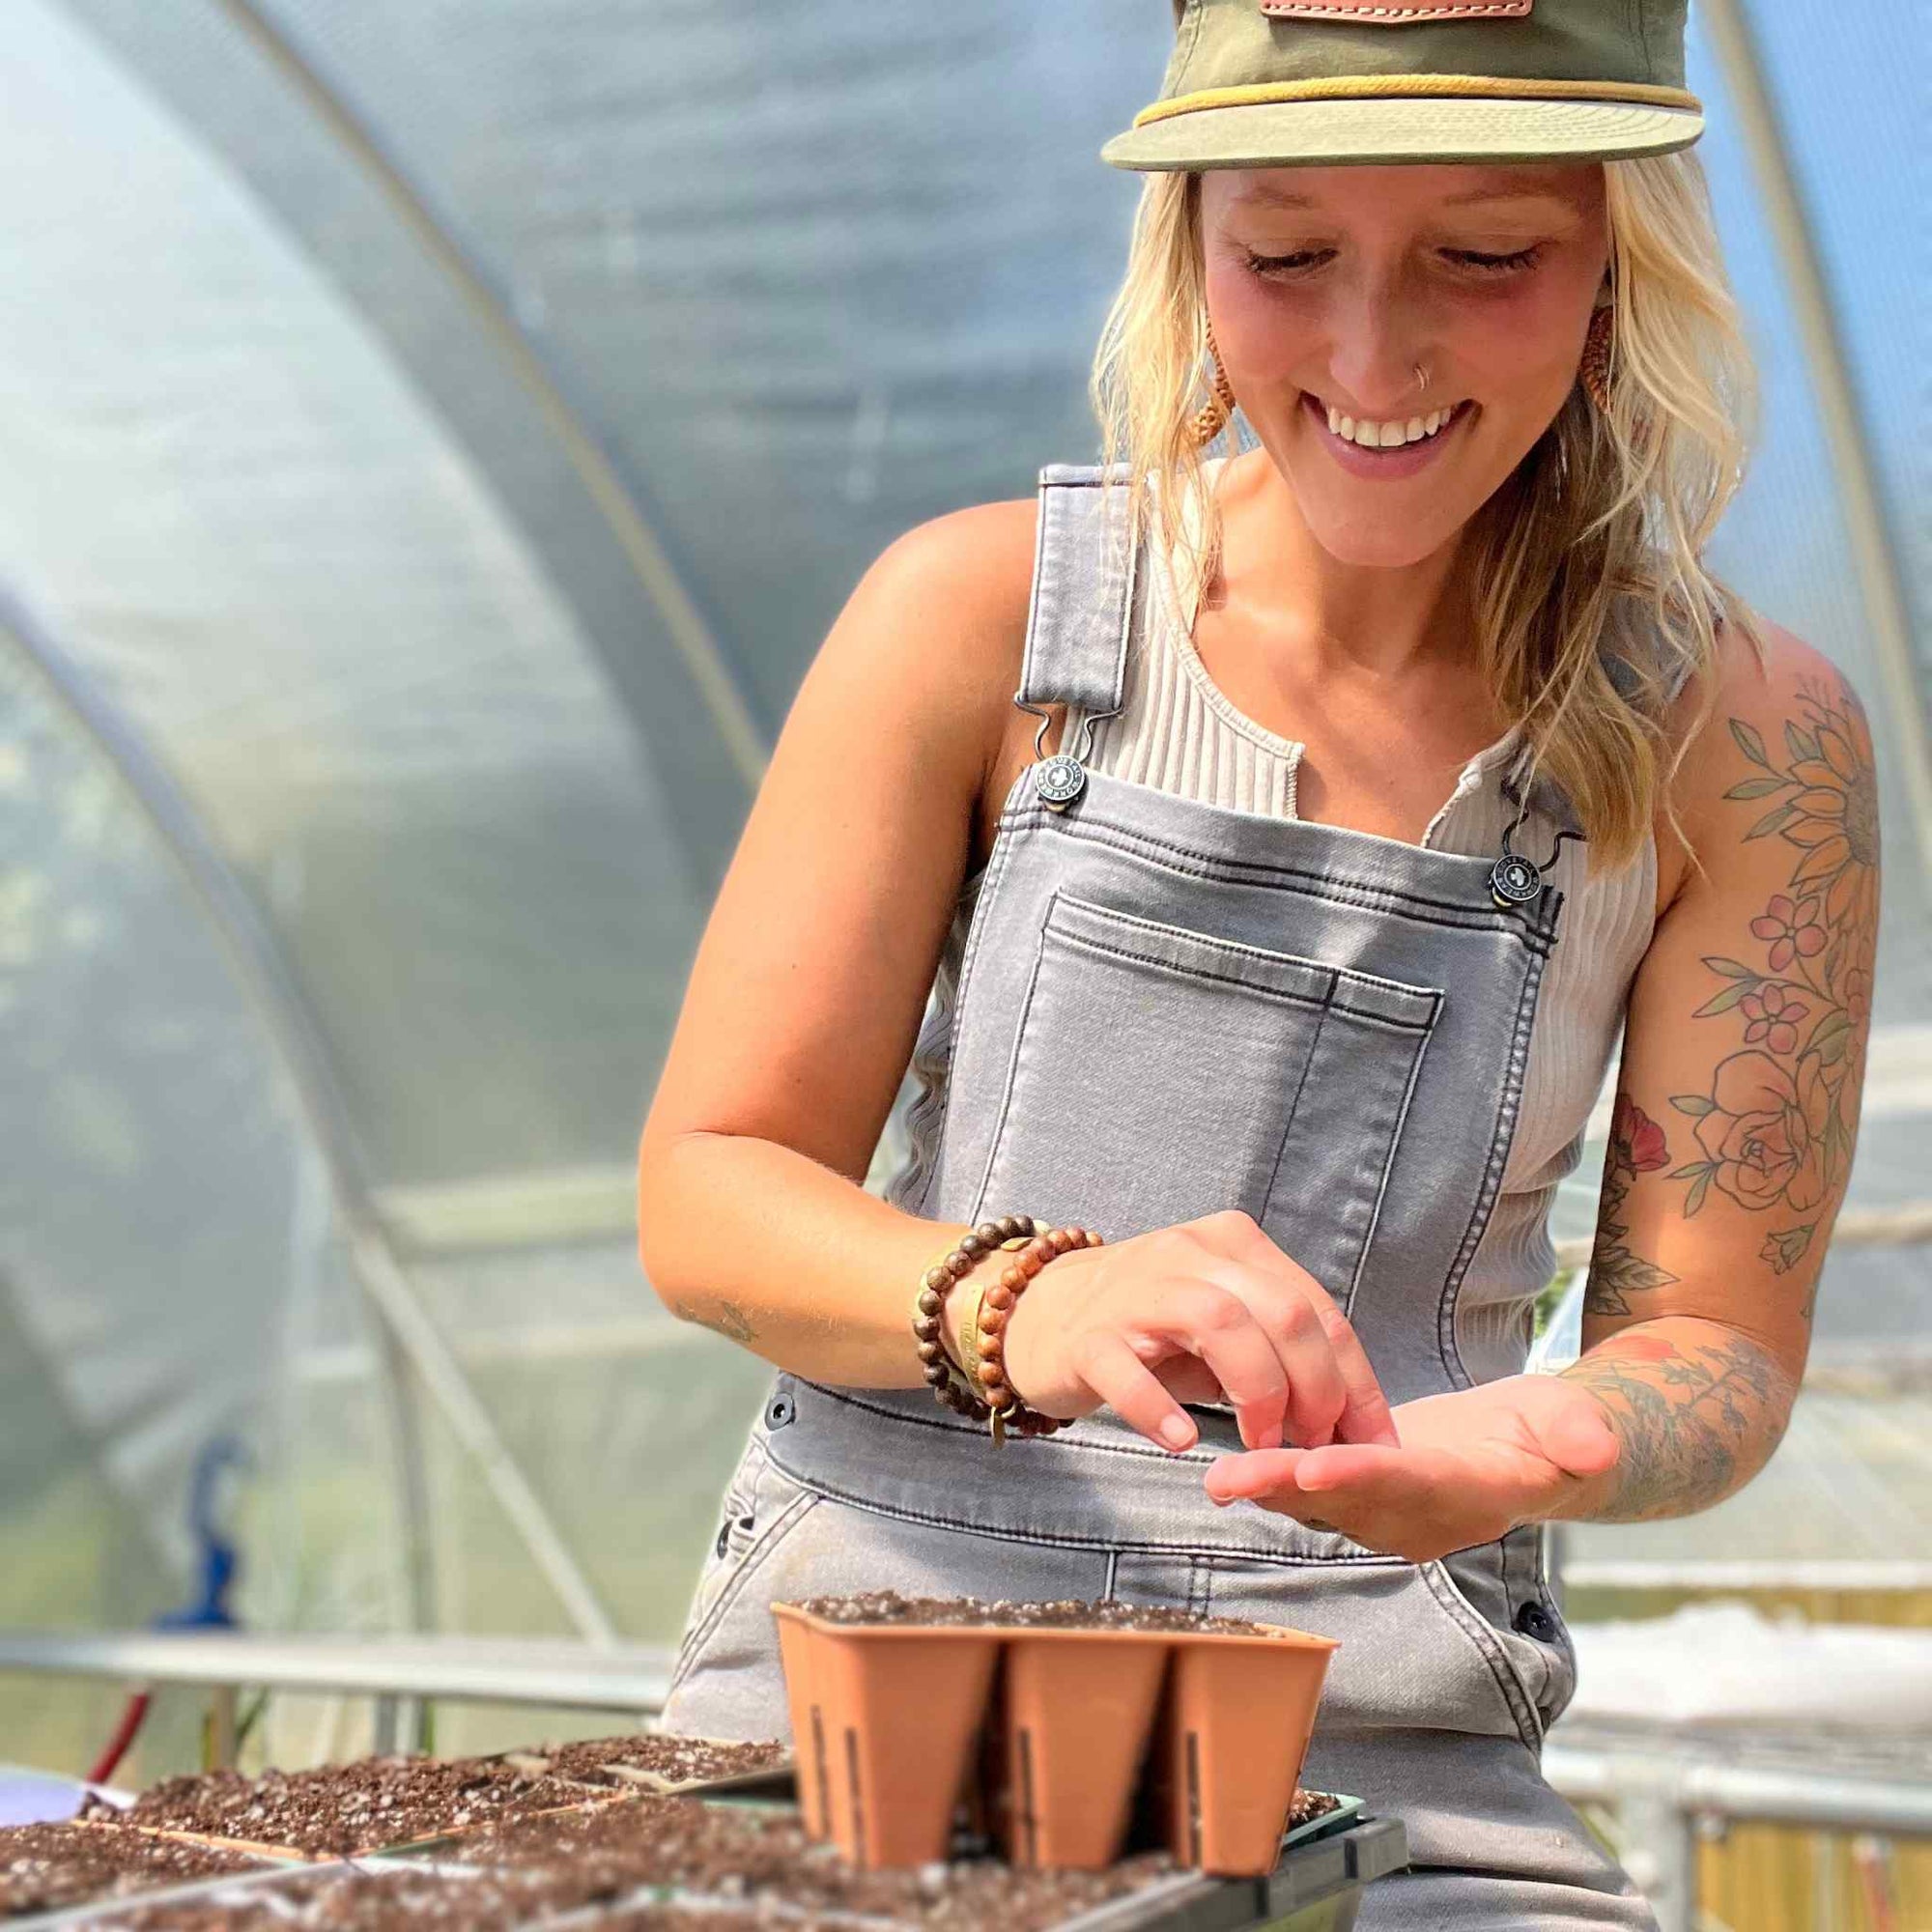 Jill of Whispering Willow Farm holding seeds and planting into bronze 6 cell in her greenhouse